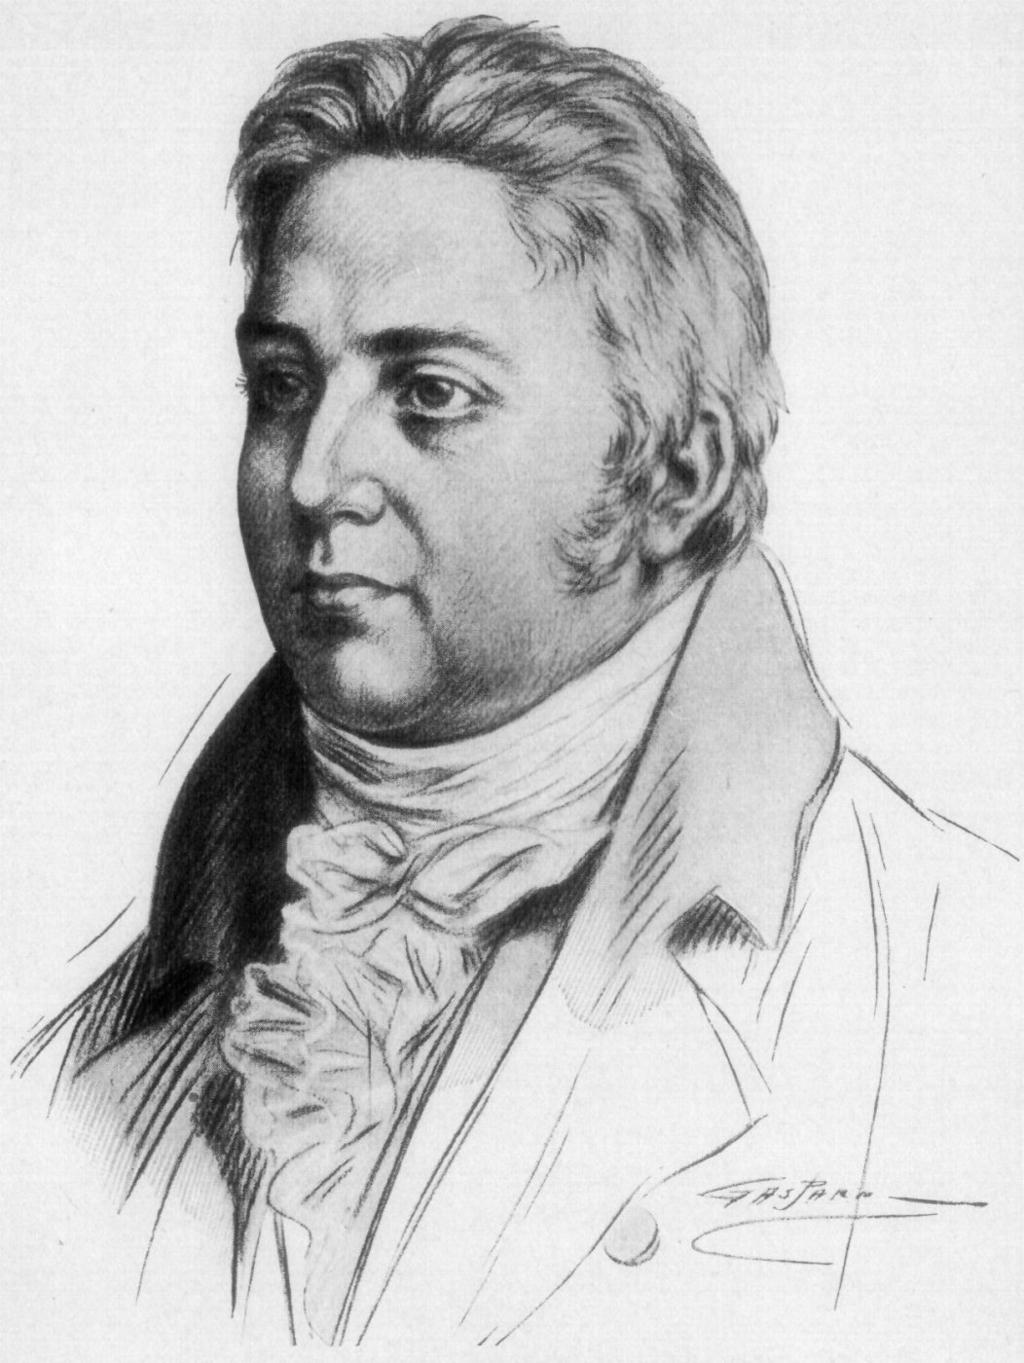 Samuel Taylor Coleridge LIFE Born in Devonshire in 1772; School in London and Cambridge but never graduated; Influenced by French revolution ideals, but then upset by its